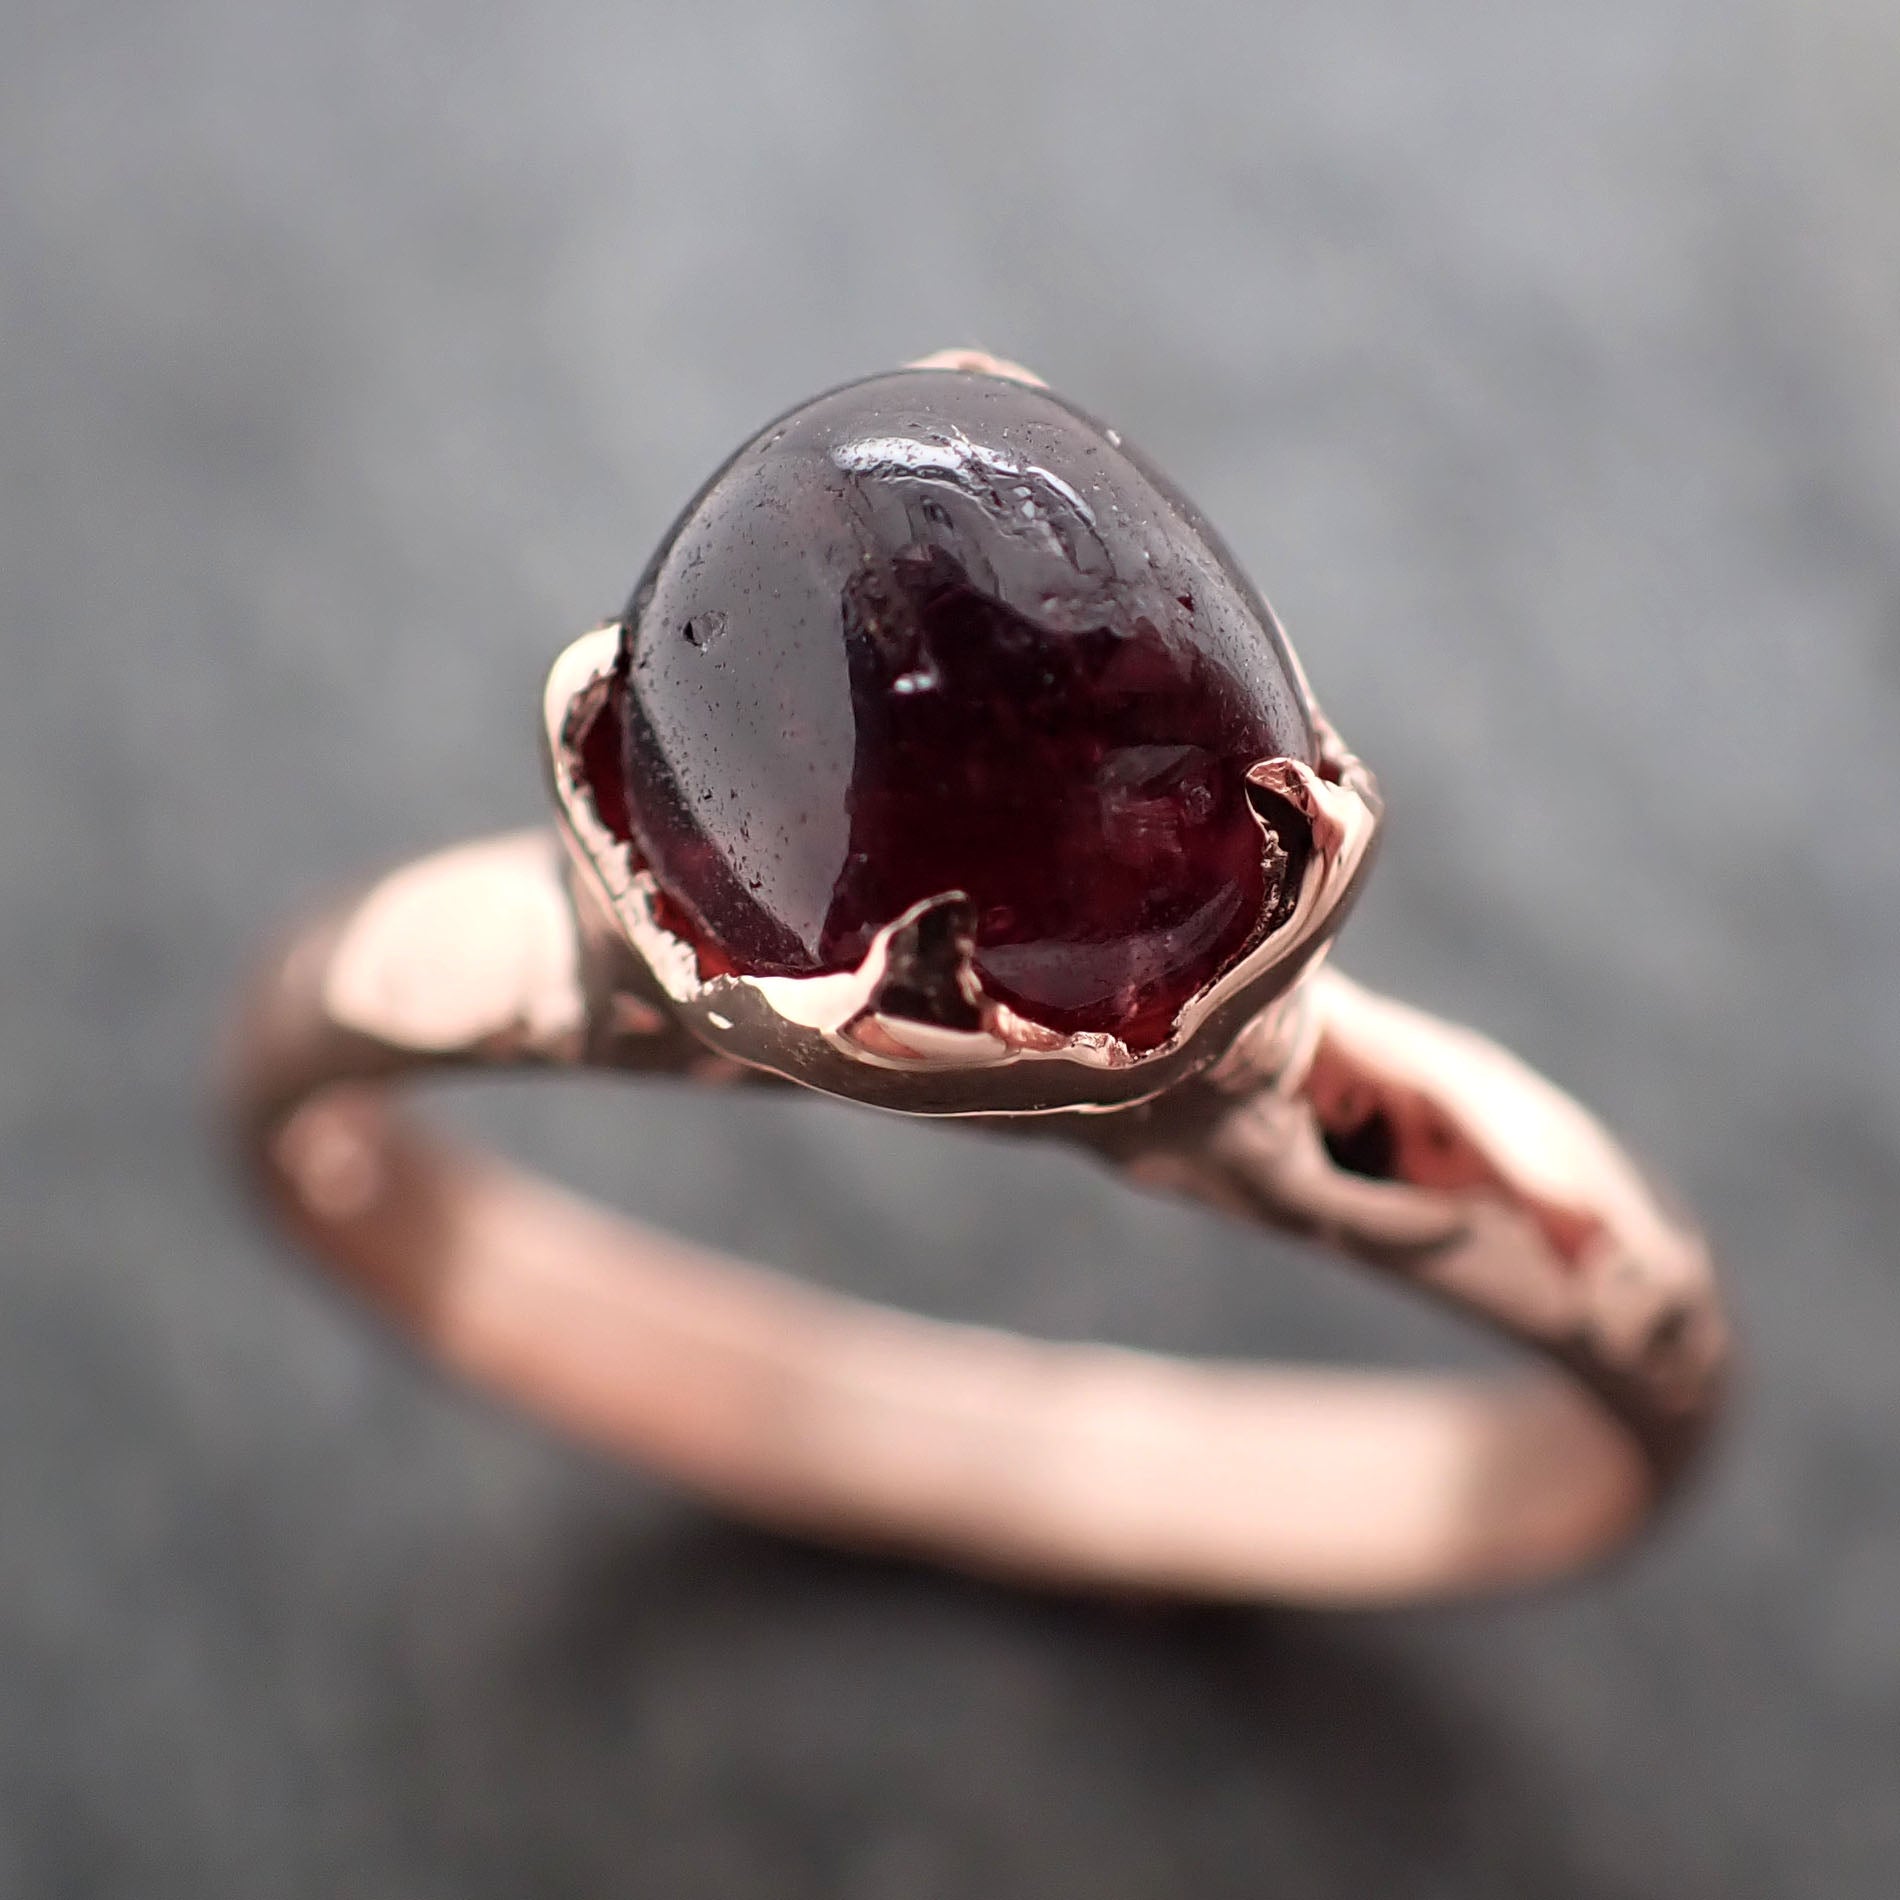 Sapphire Pebble Ruby red candy polished 14k Rose gold Solitaire gemstone ring 2879